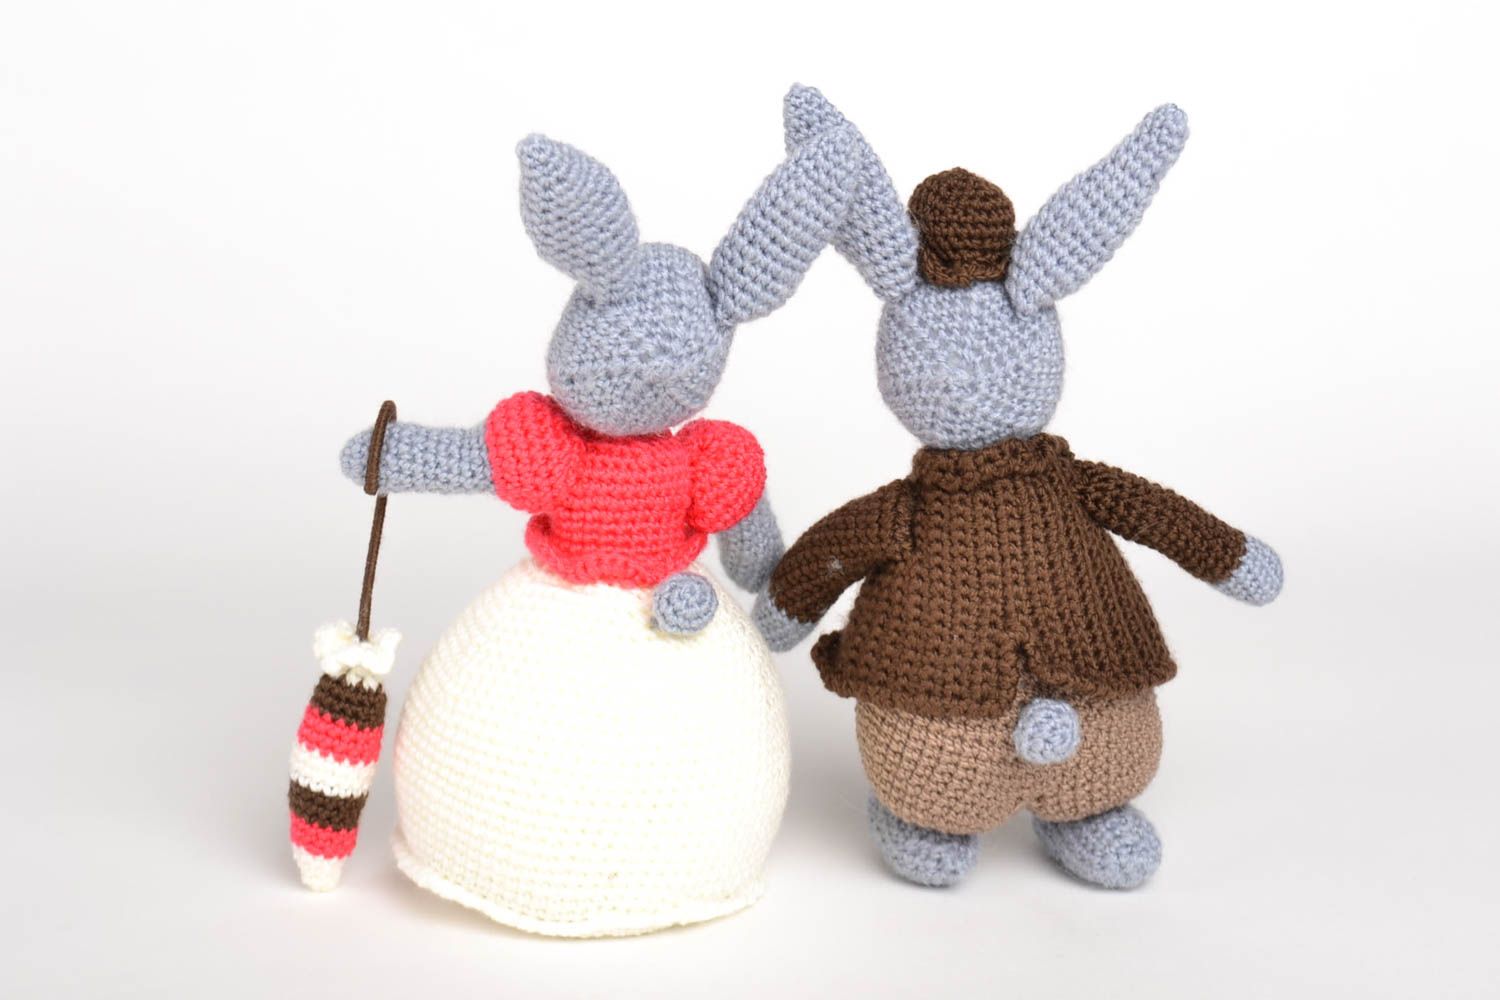 Handmade soft toy childrens toys 2 pieces knitted toy birthday gift ideas photo 3